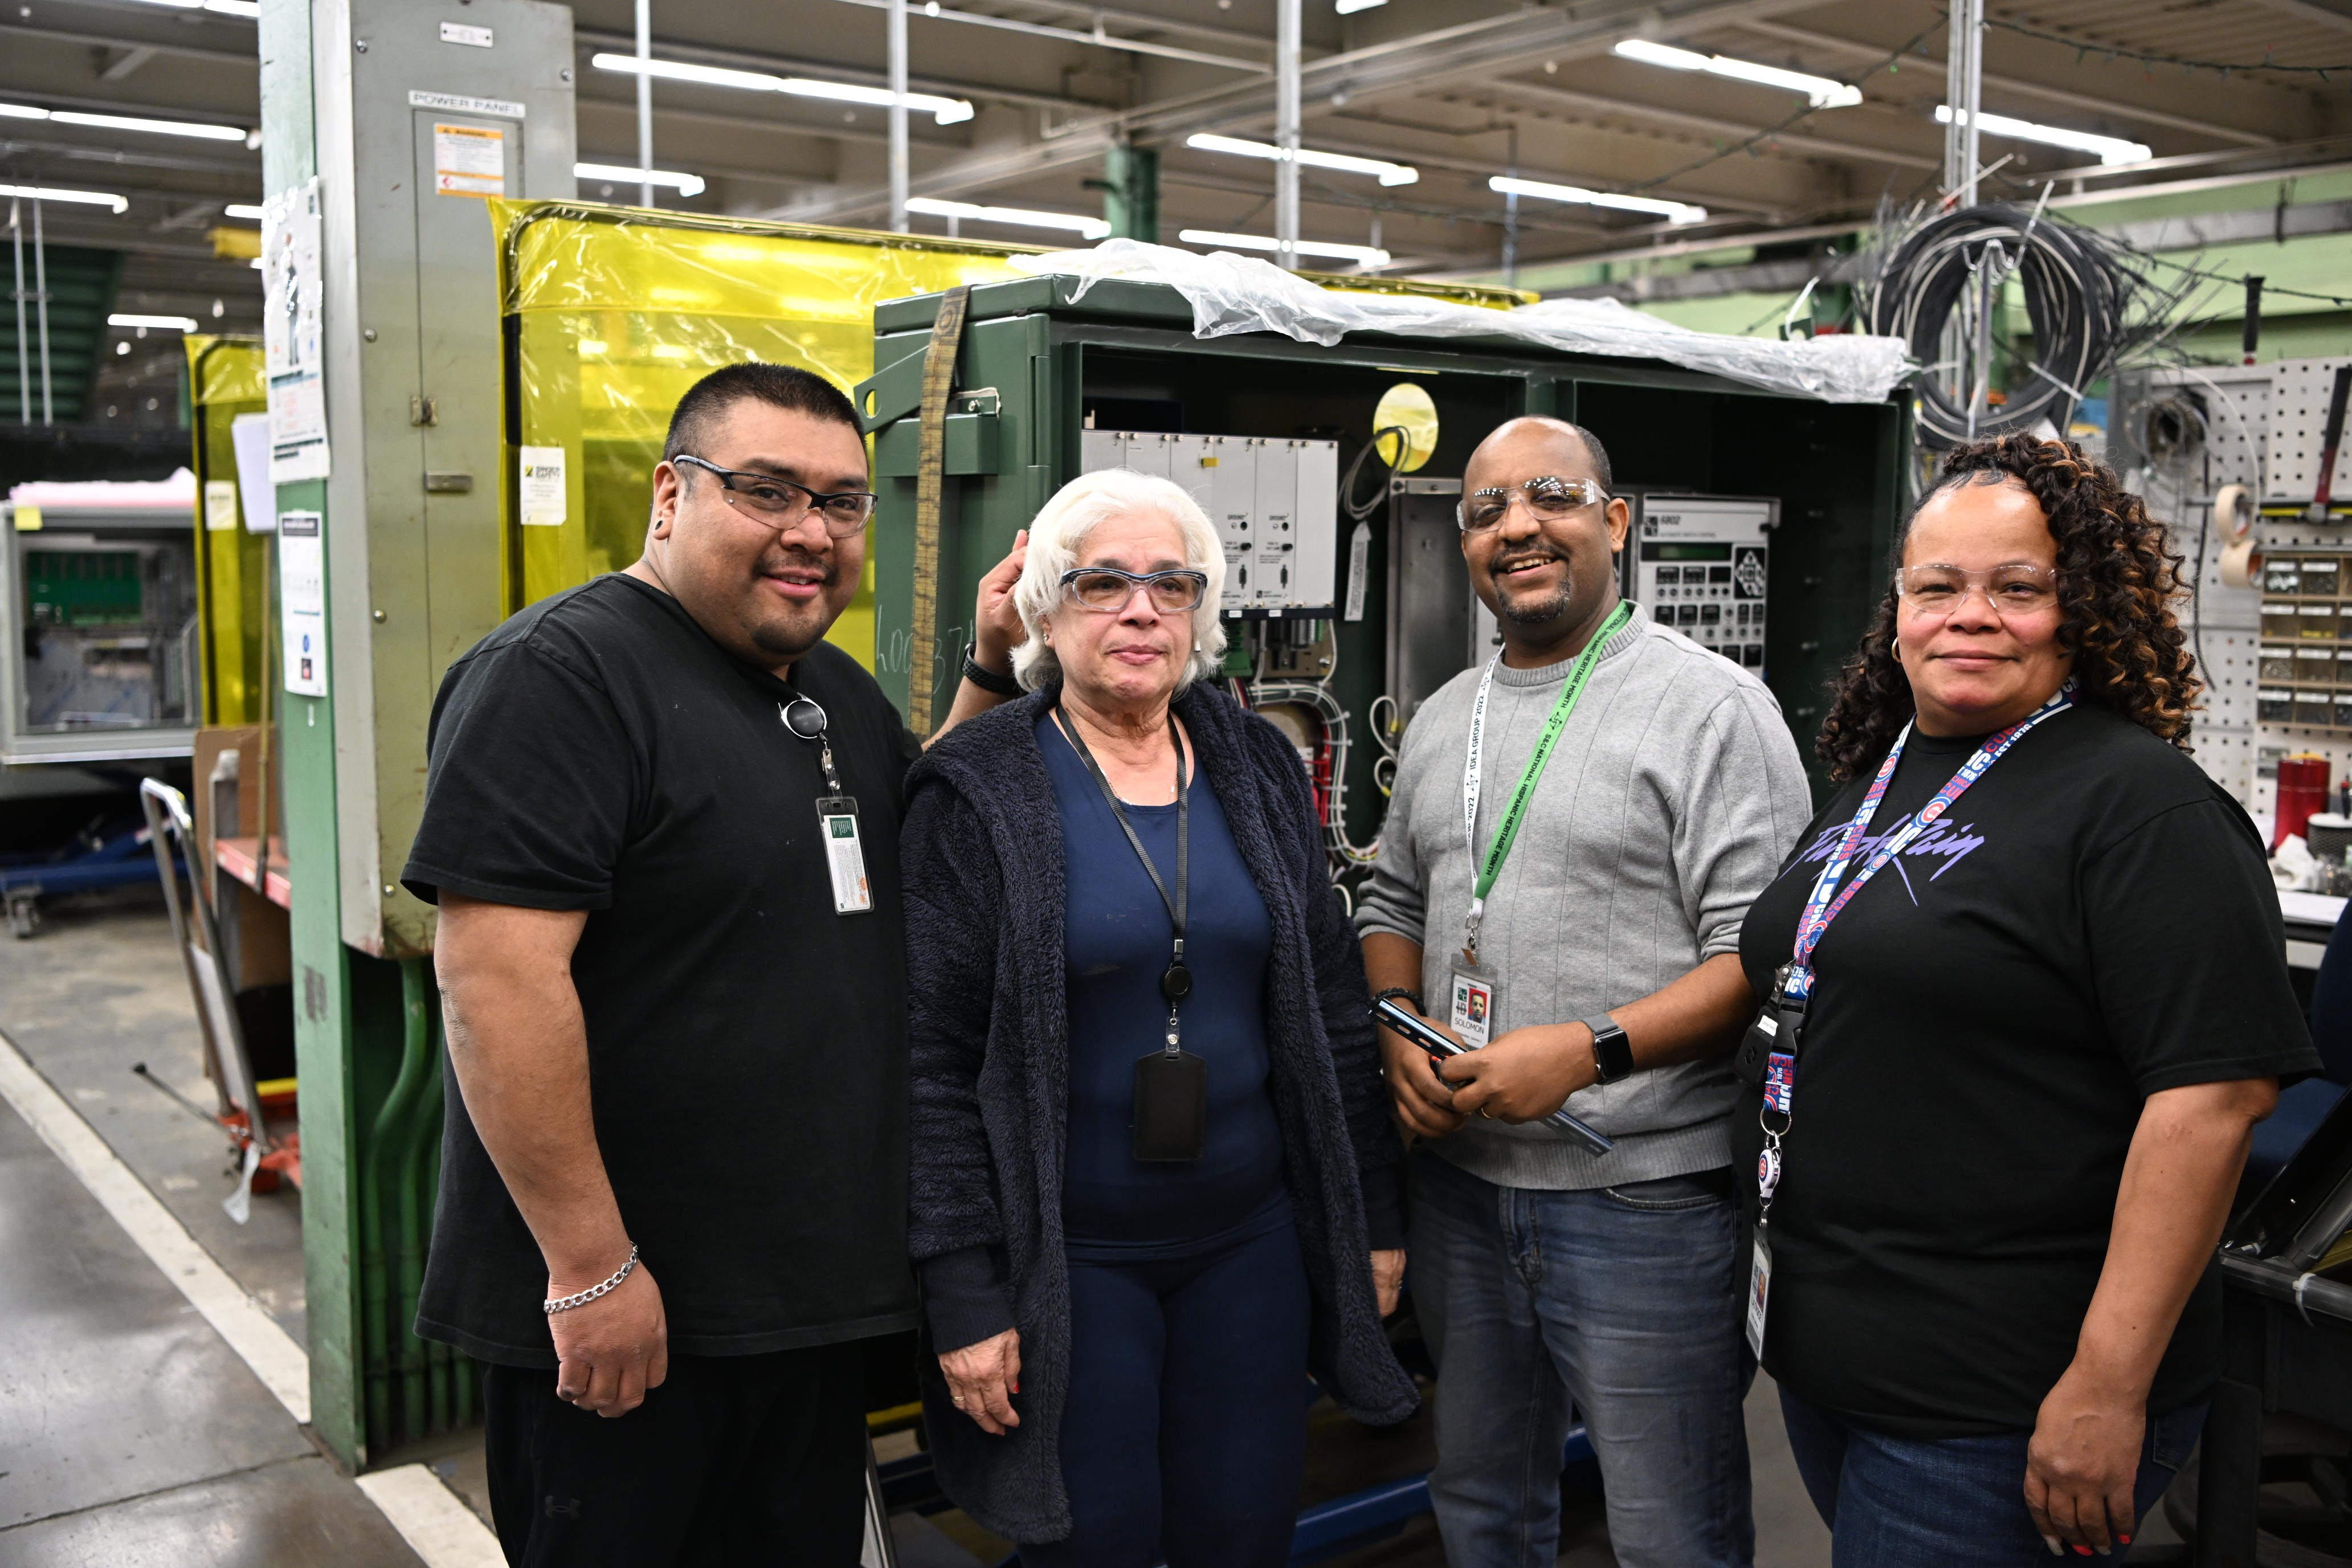 Four team members pose on the manufacturing floor